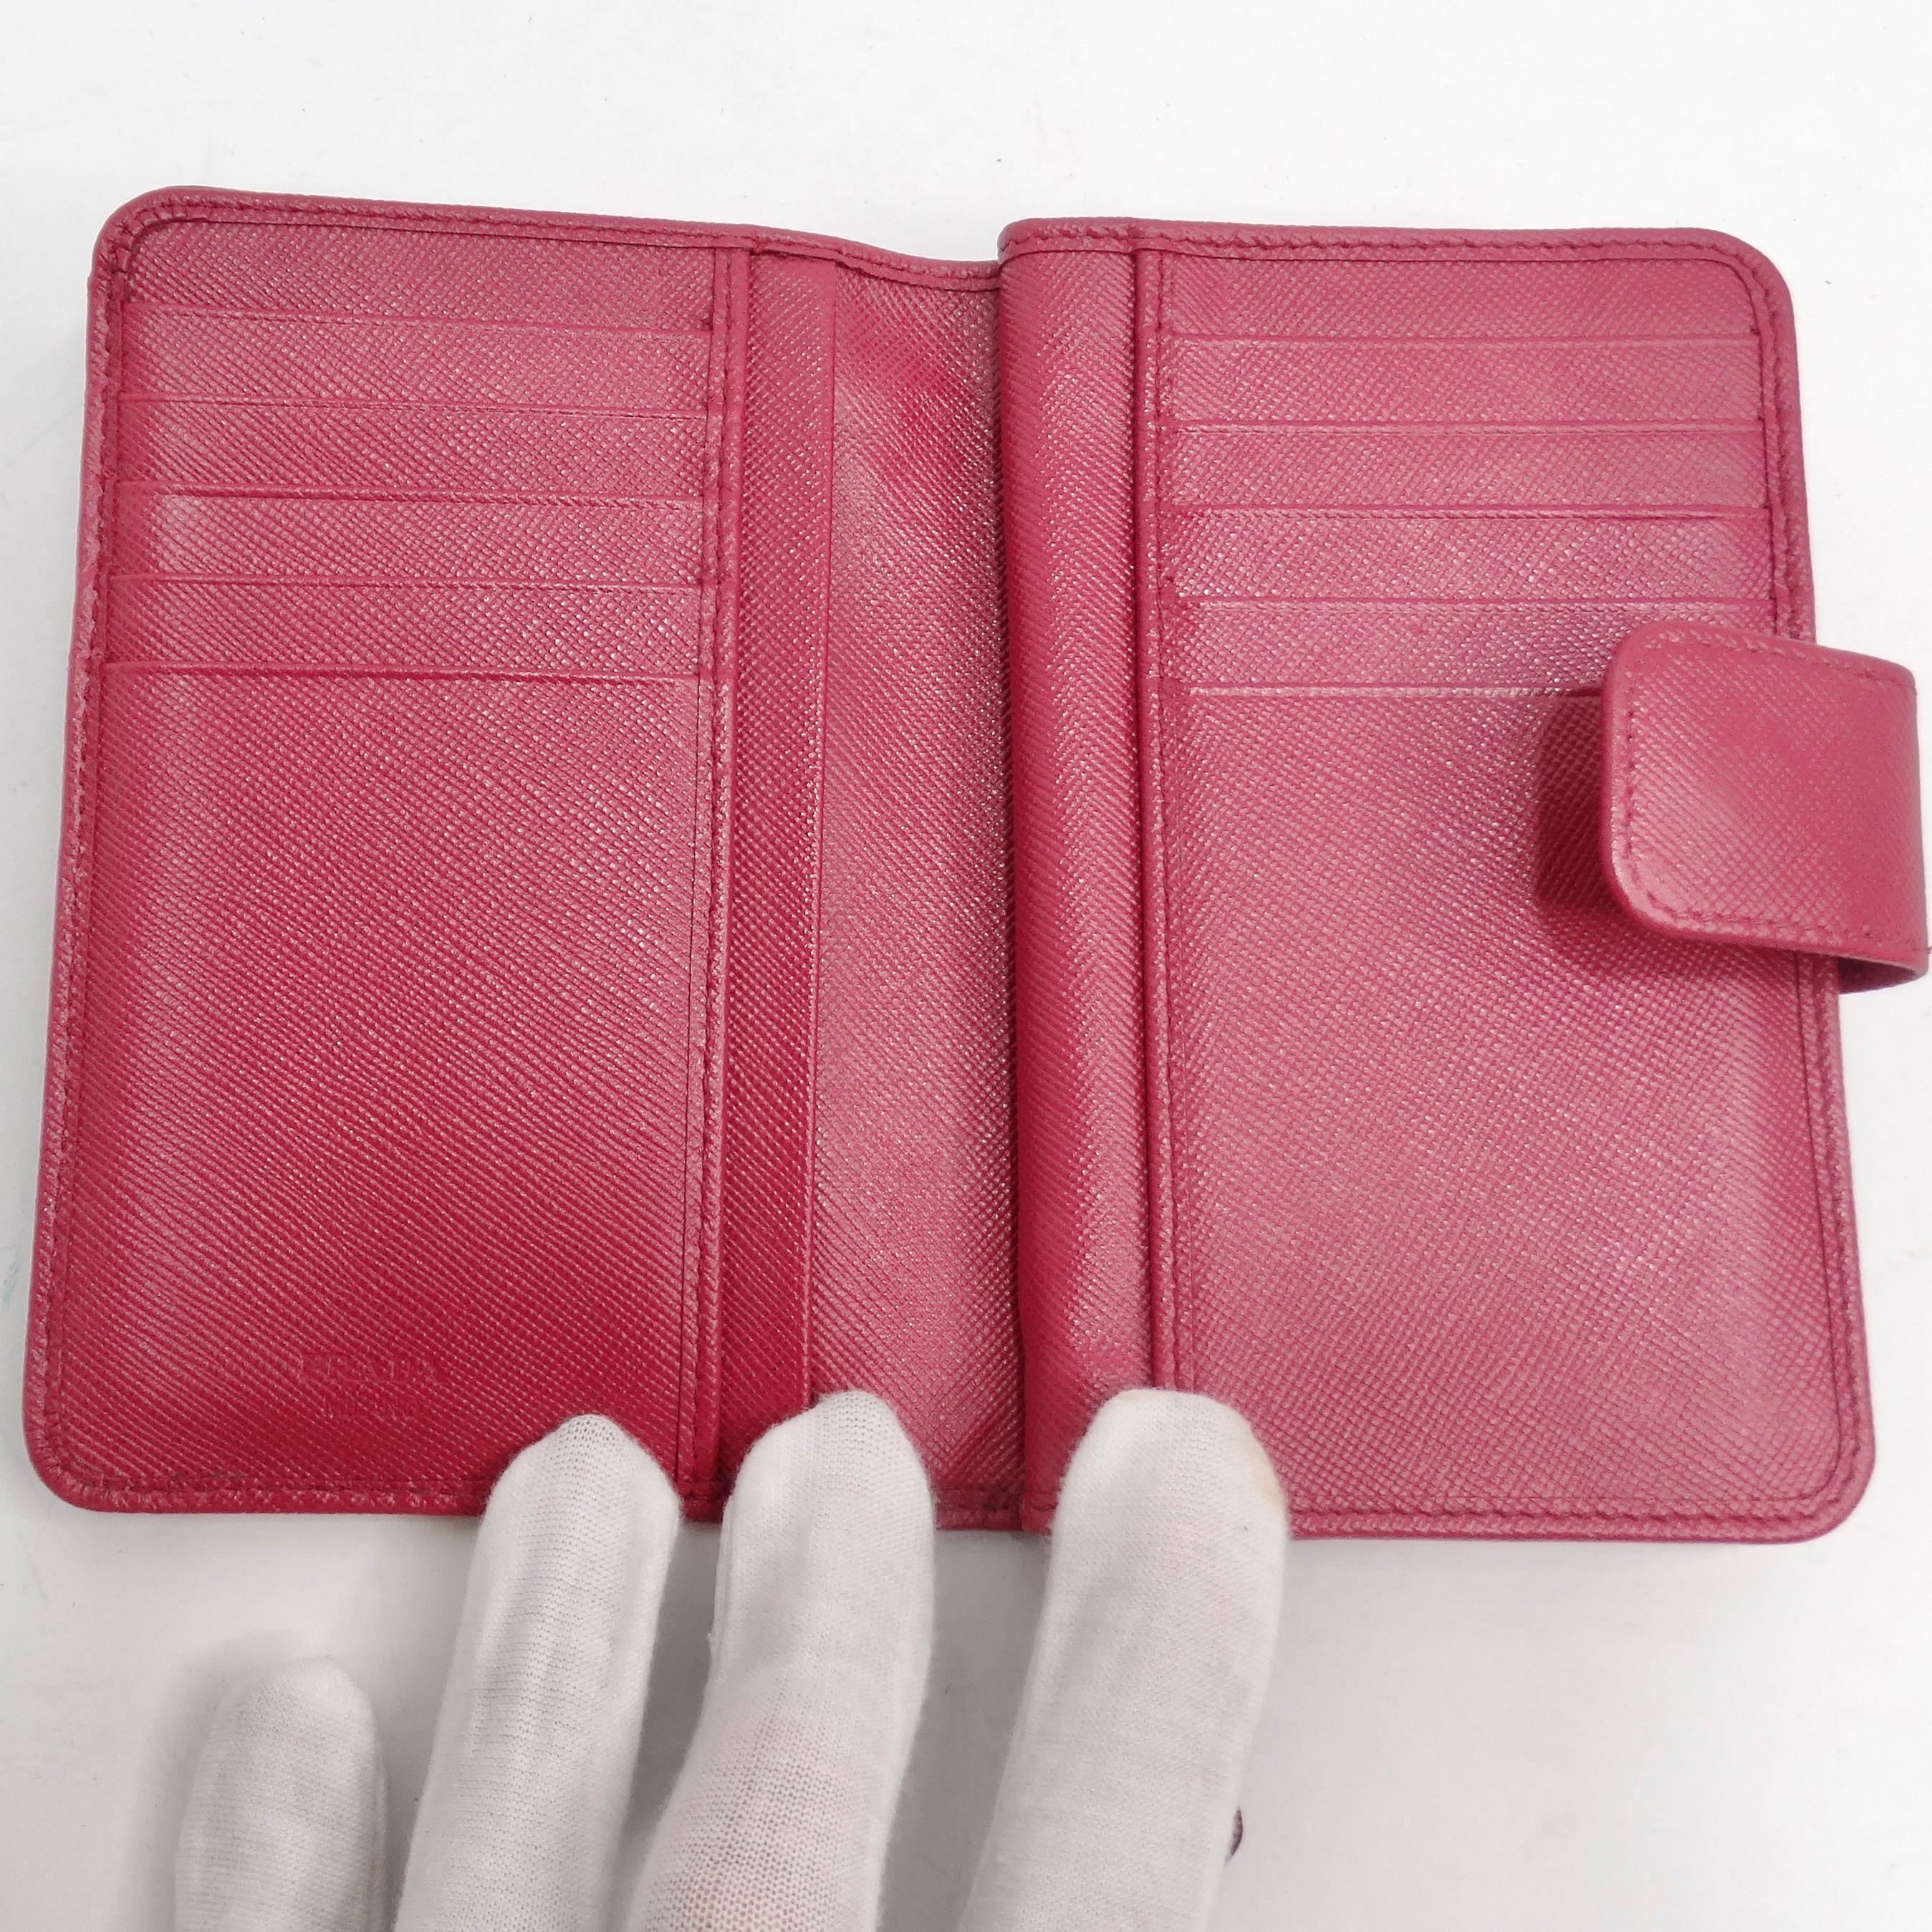 Prada Saffiano Leather Compact Wallet Pink For Sale 4